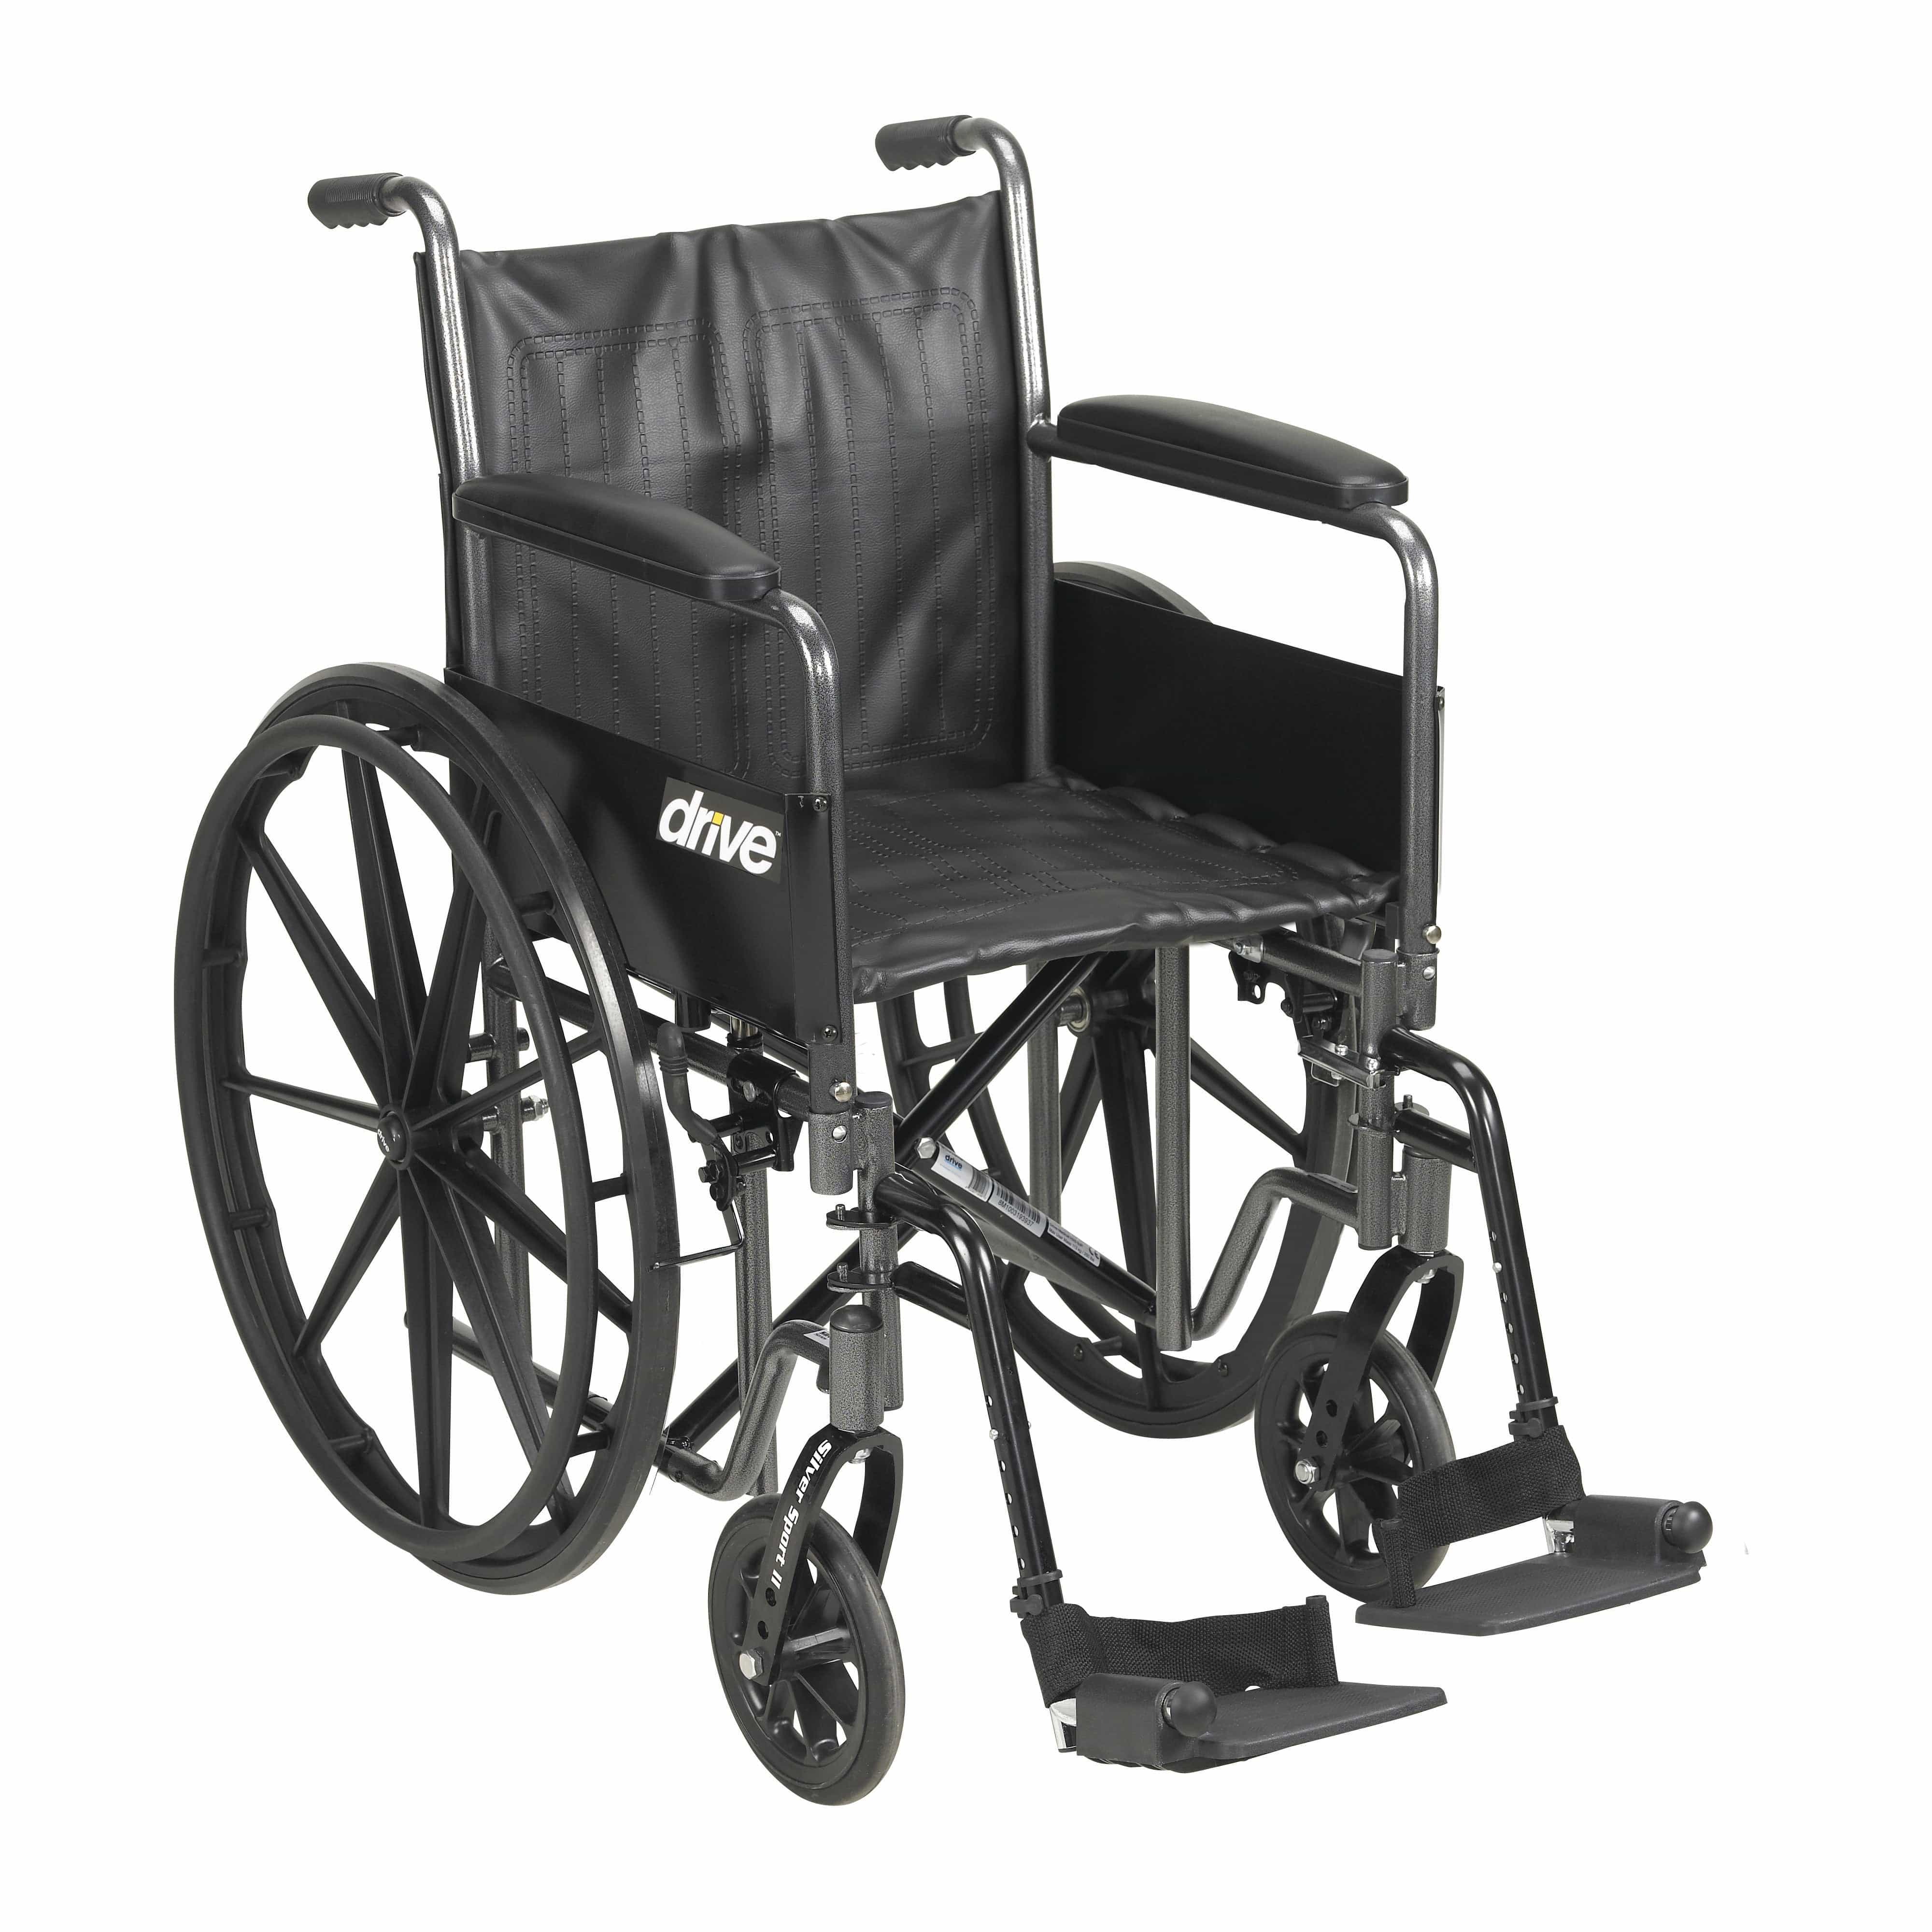 Drive Medical Wheelchairs/Standard Wheelchairs Detachable Full Arms and Swing away Footrests / 20" Seat Drive Medical Silver Sport 2 Wheelchair